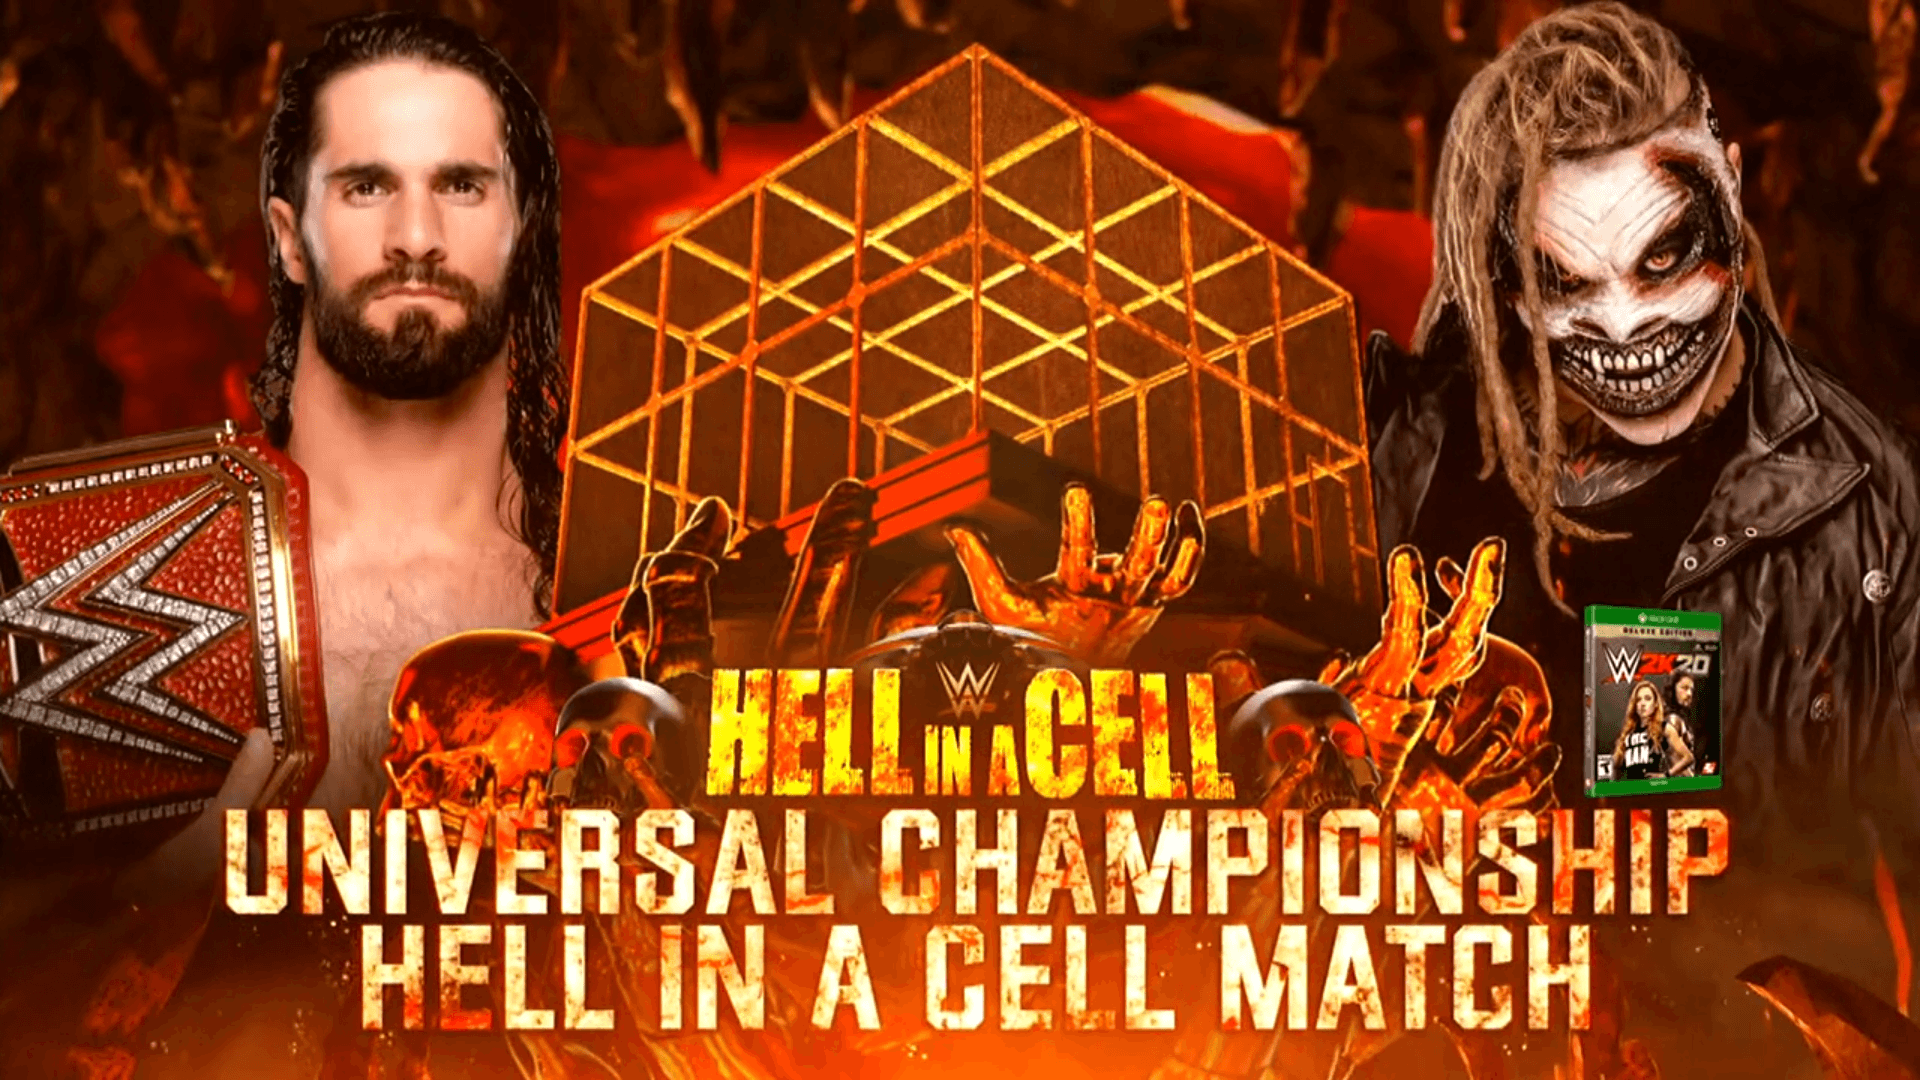 Seth Rollins vs. The Fiend Hell in a Cell 2019